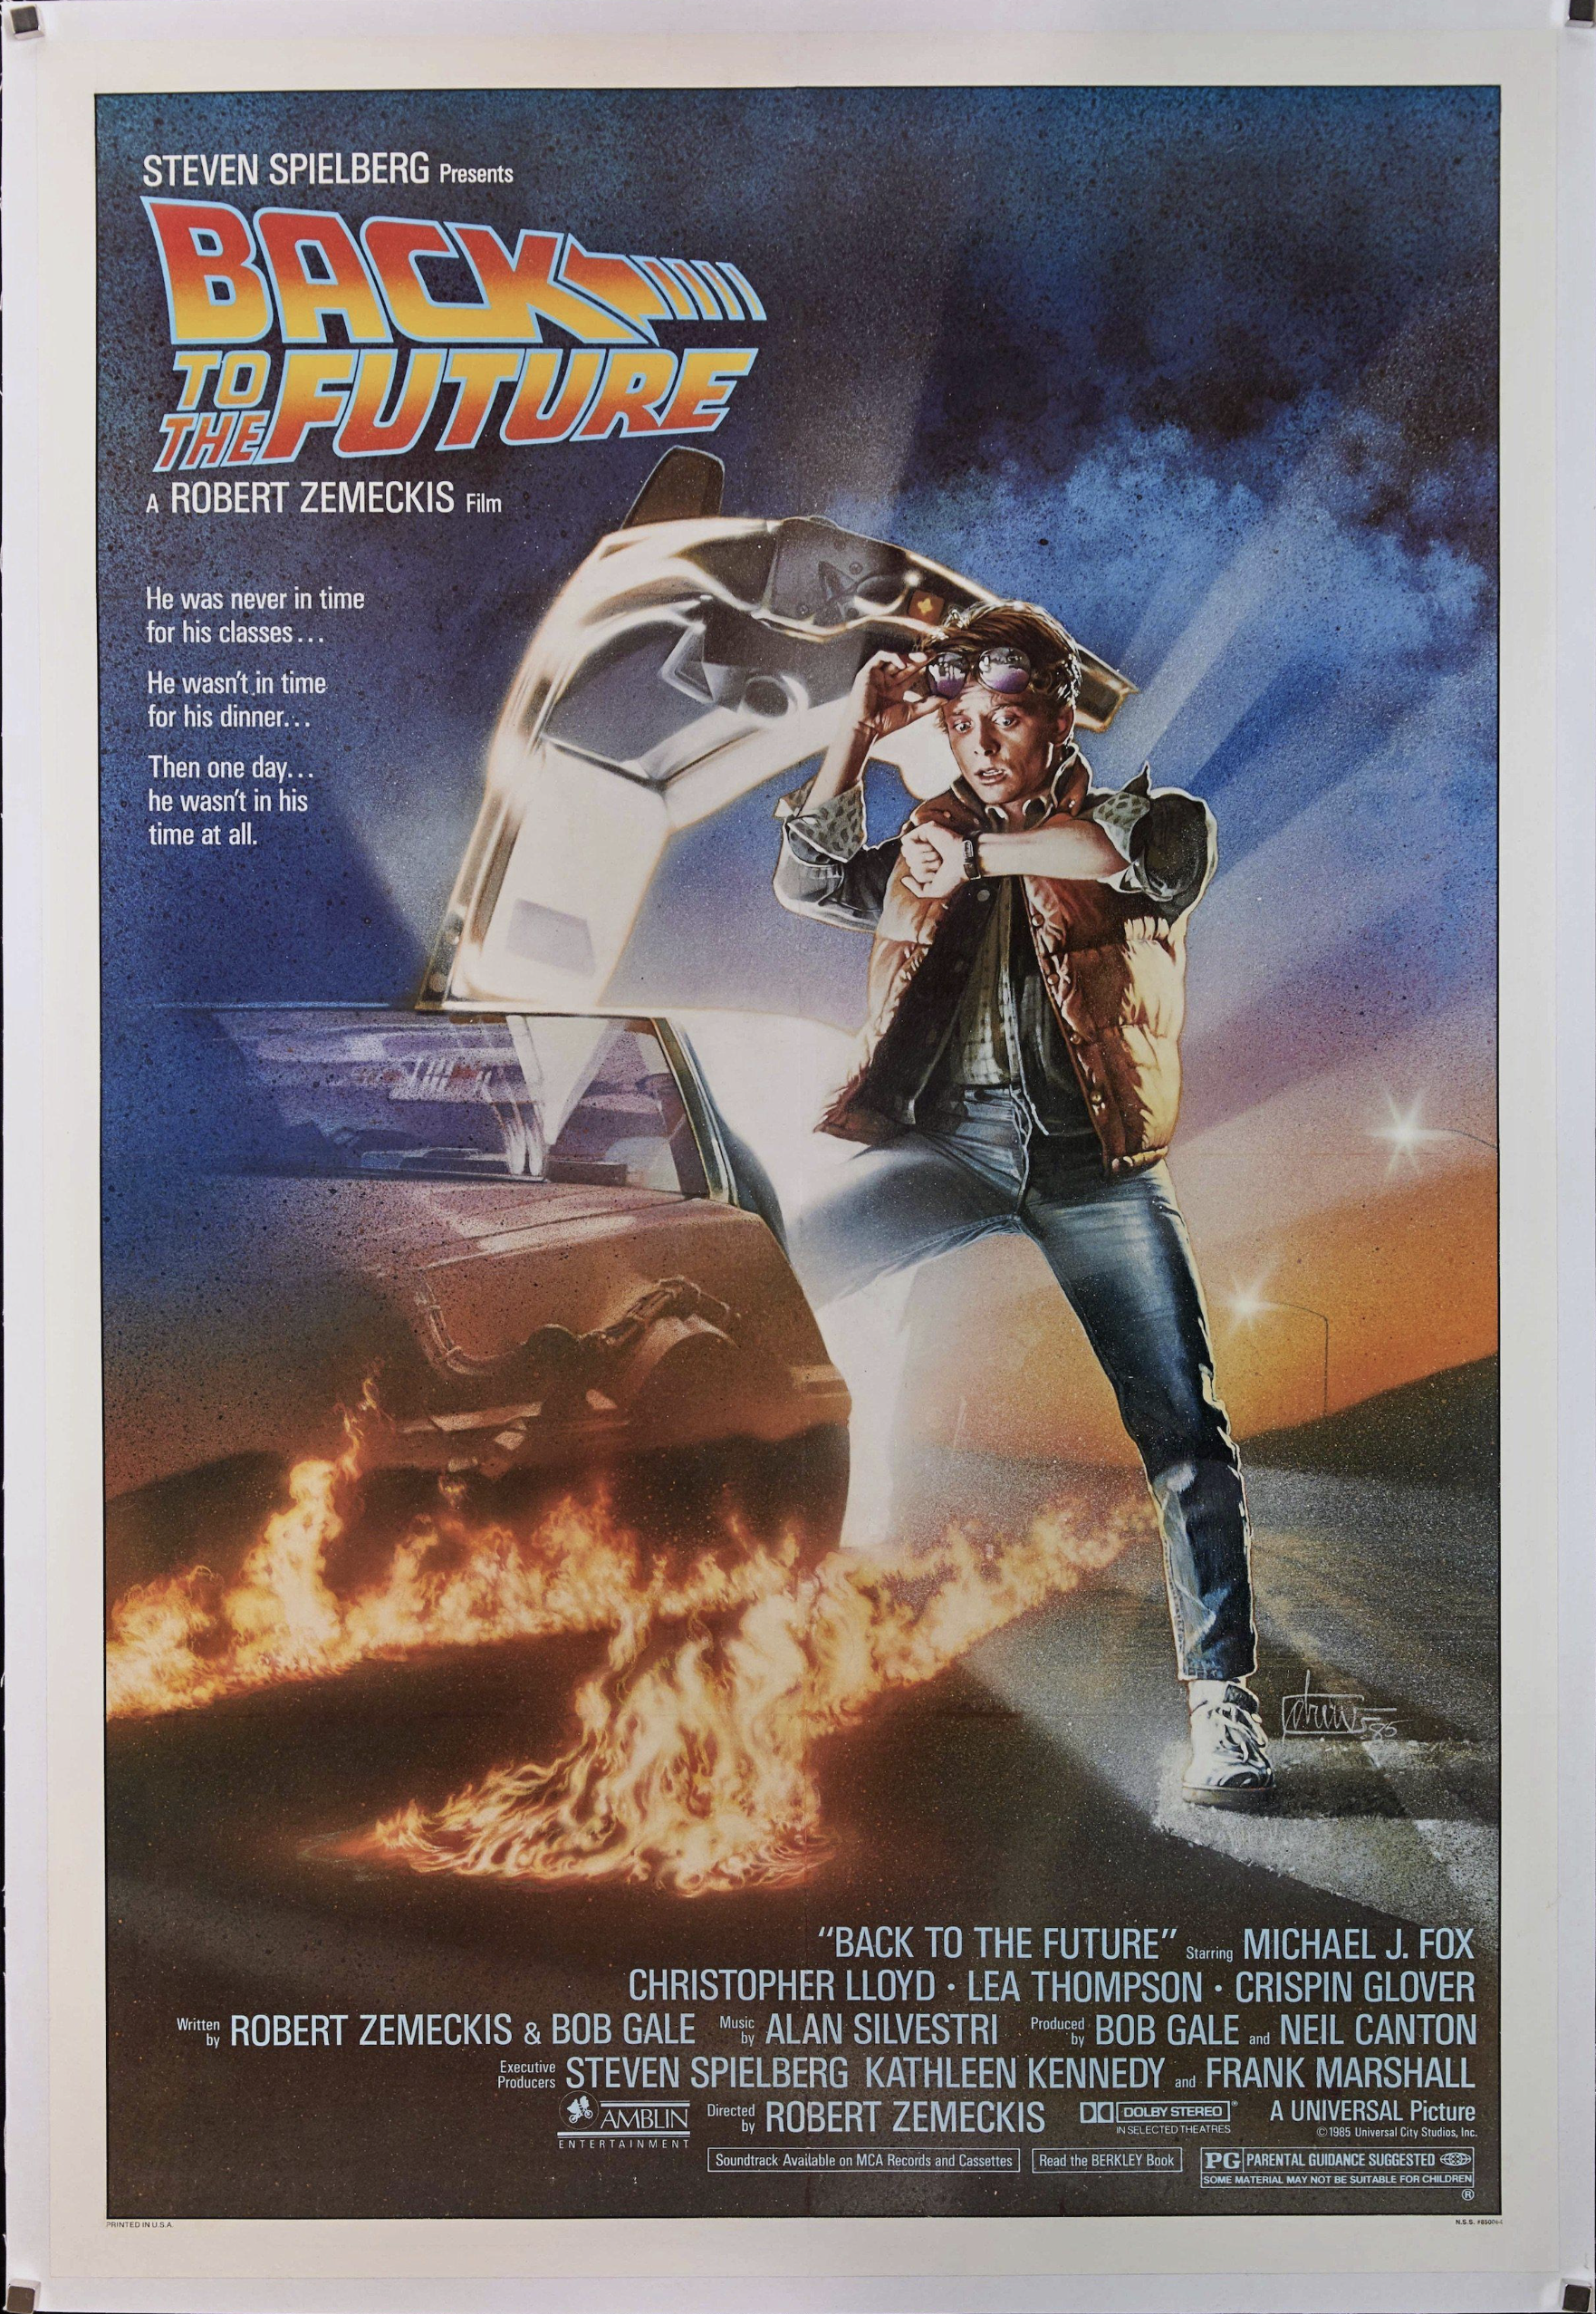 The original Back to the Future movie poster